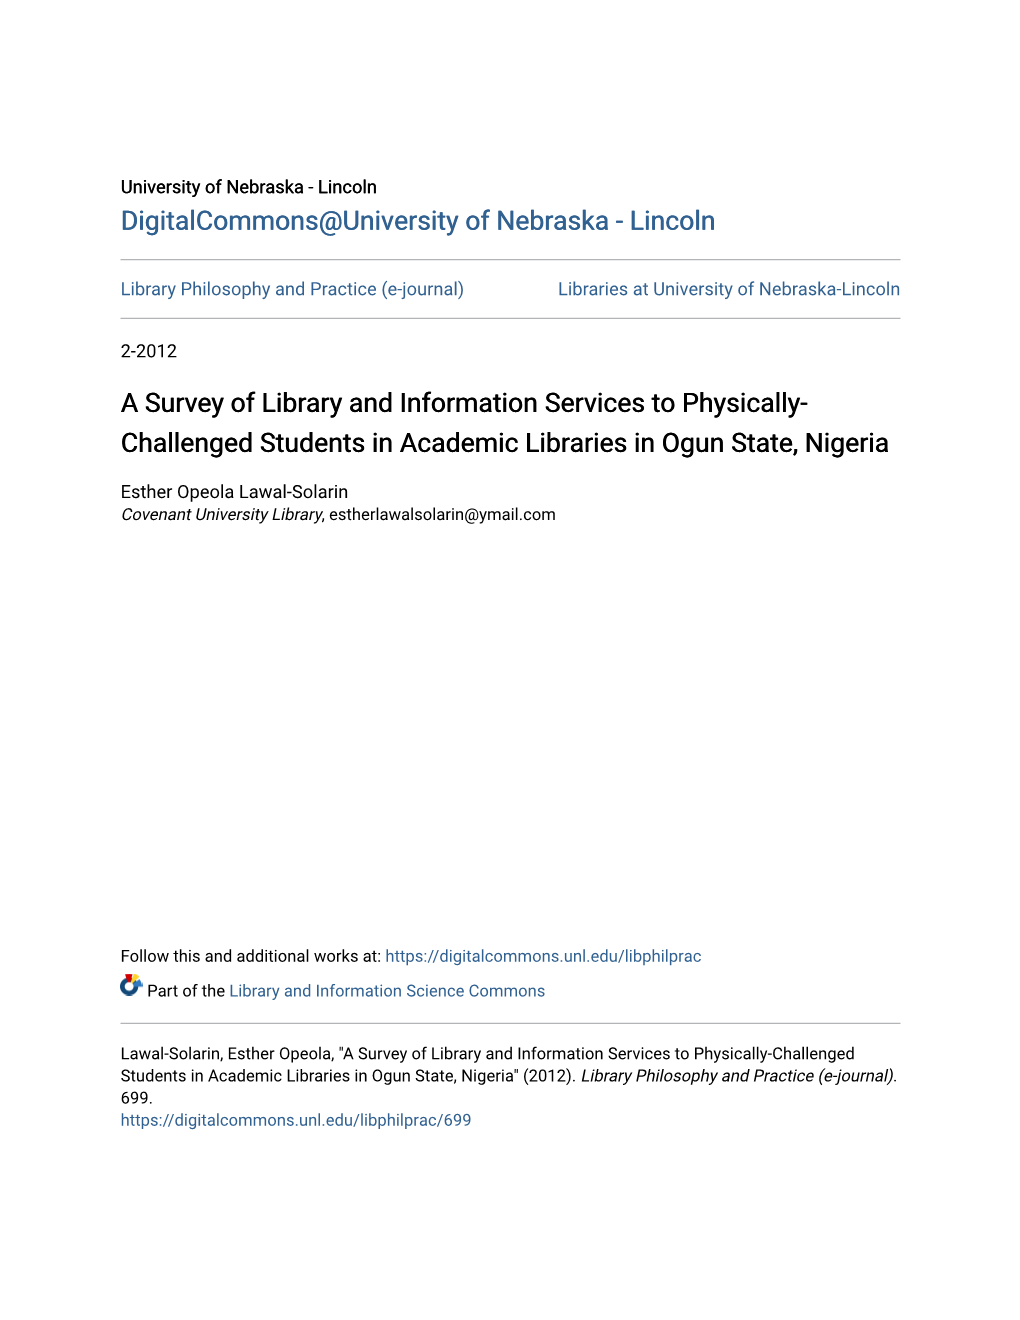 A Survey of Library and Information Services to Physically-Challenged Students in Academic Libraries in Ogun State, Nigeria" (2012)